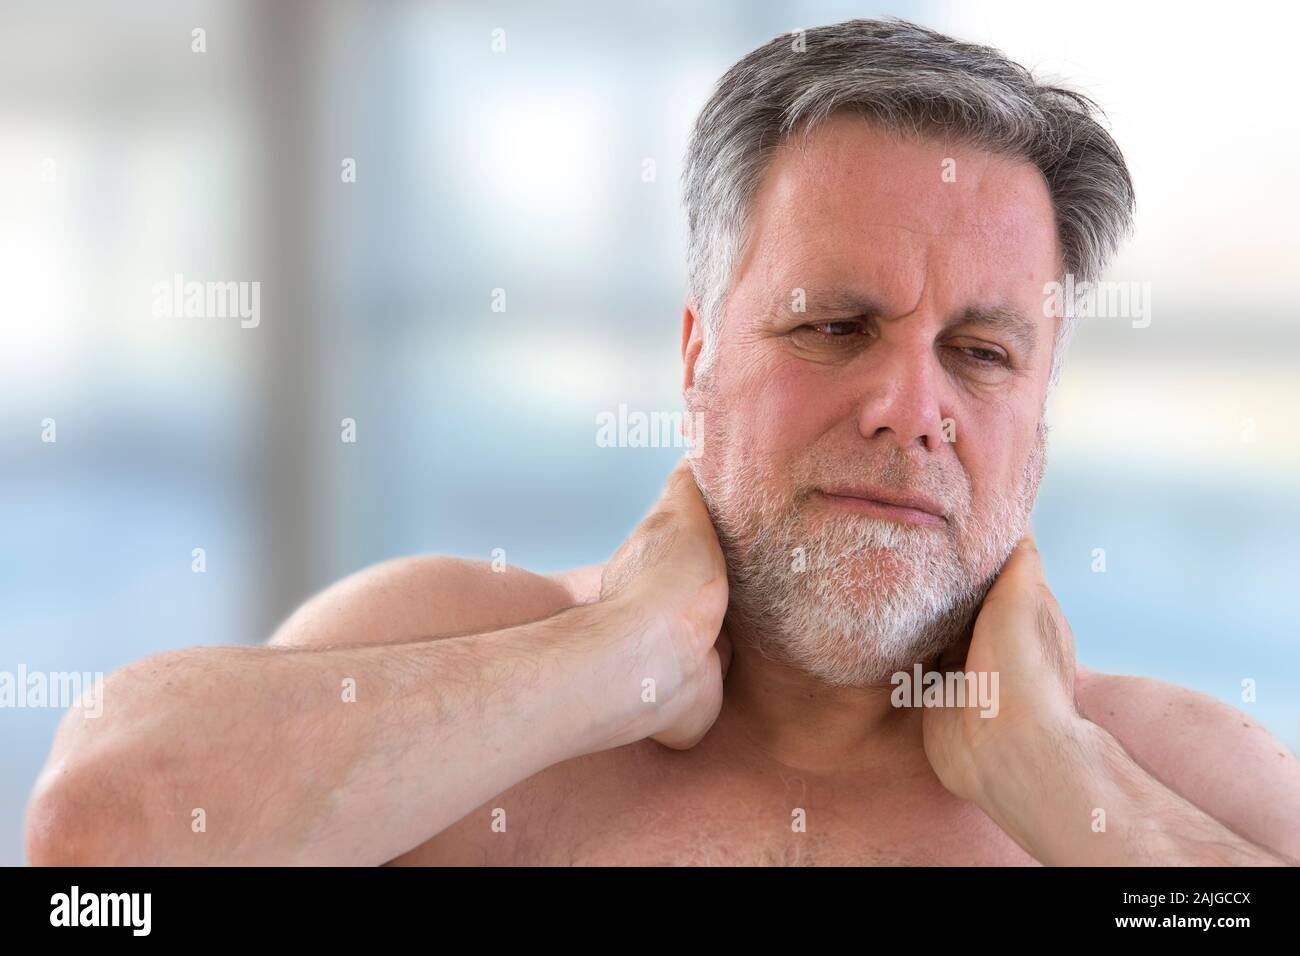 Senior man with a strong pain in the back of his neck front view Stock Photo